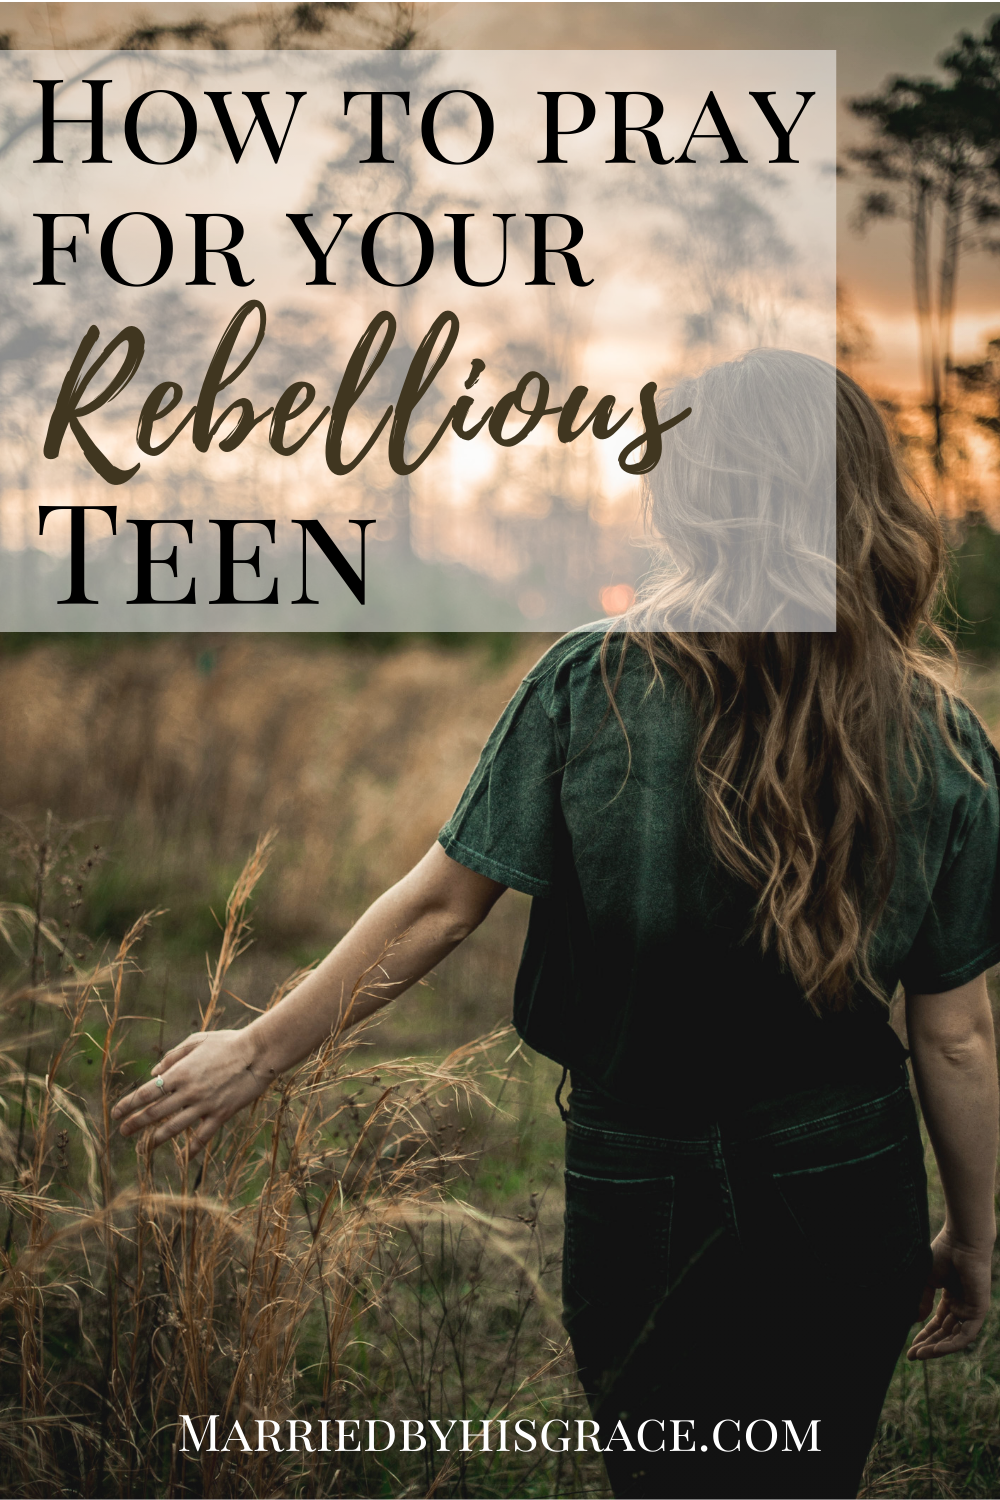 How to pray for your rebellious teen